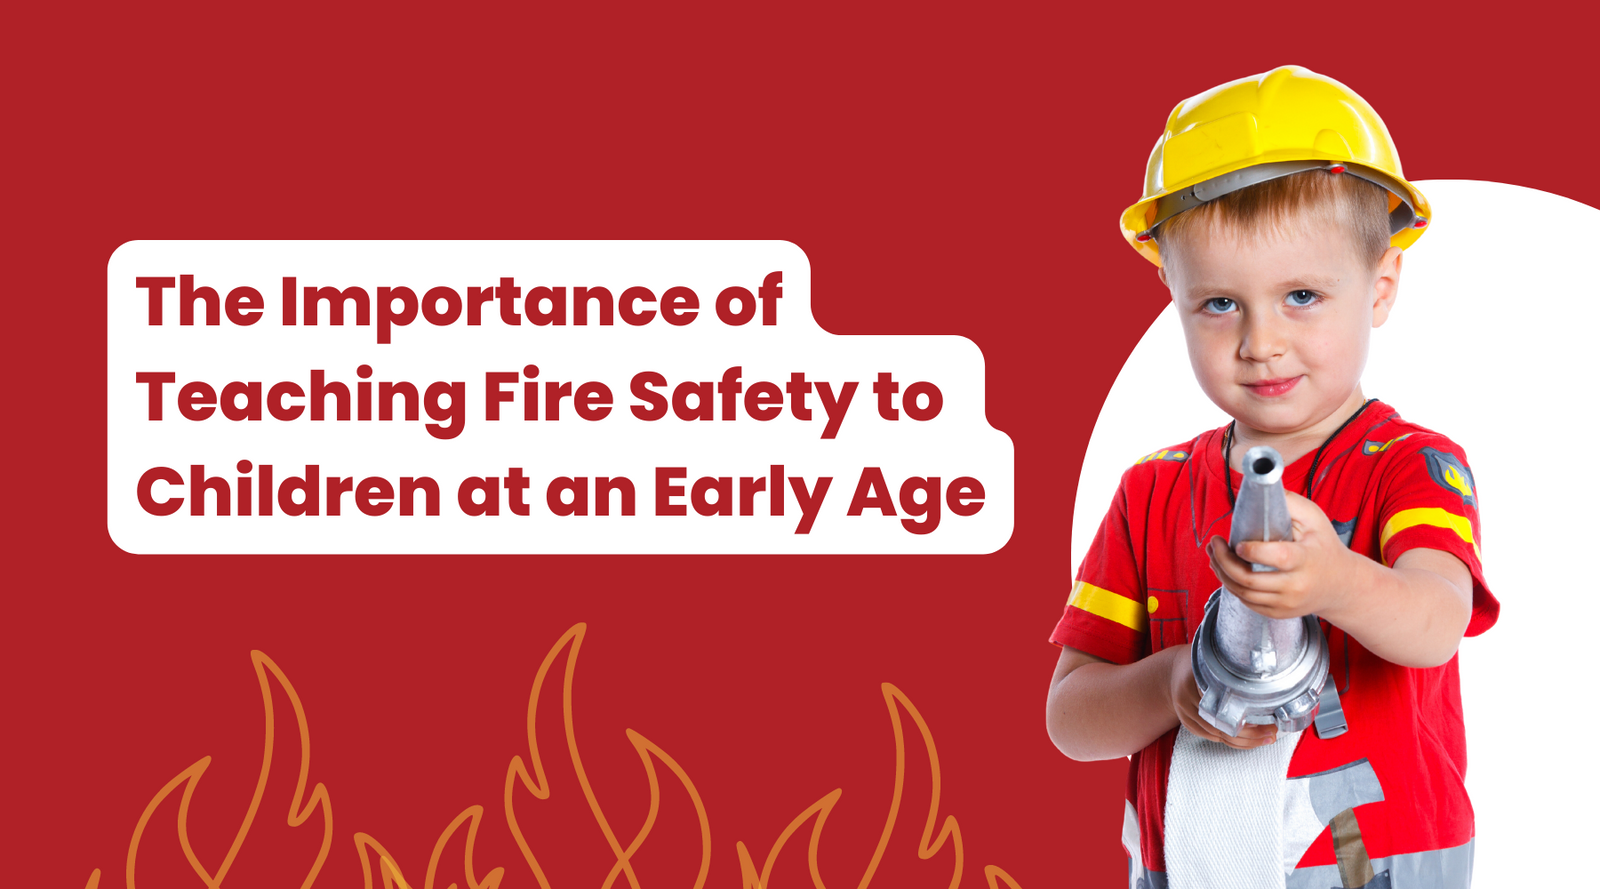 The Importance of Teaching Fire Safety to Children at an Early Age